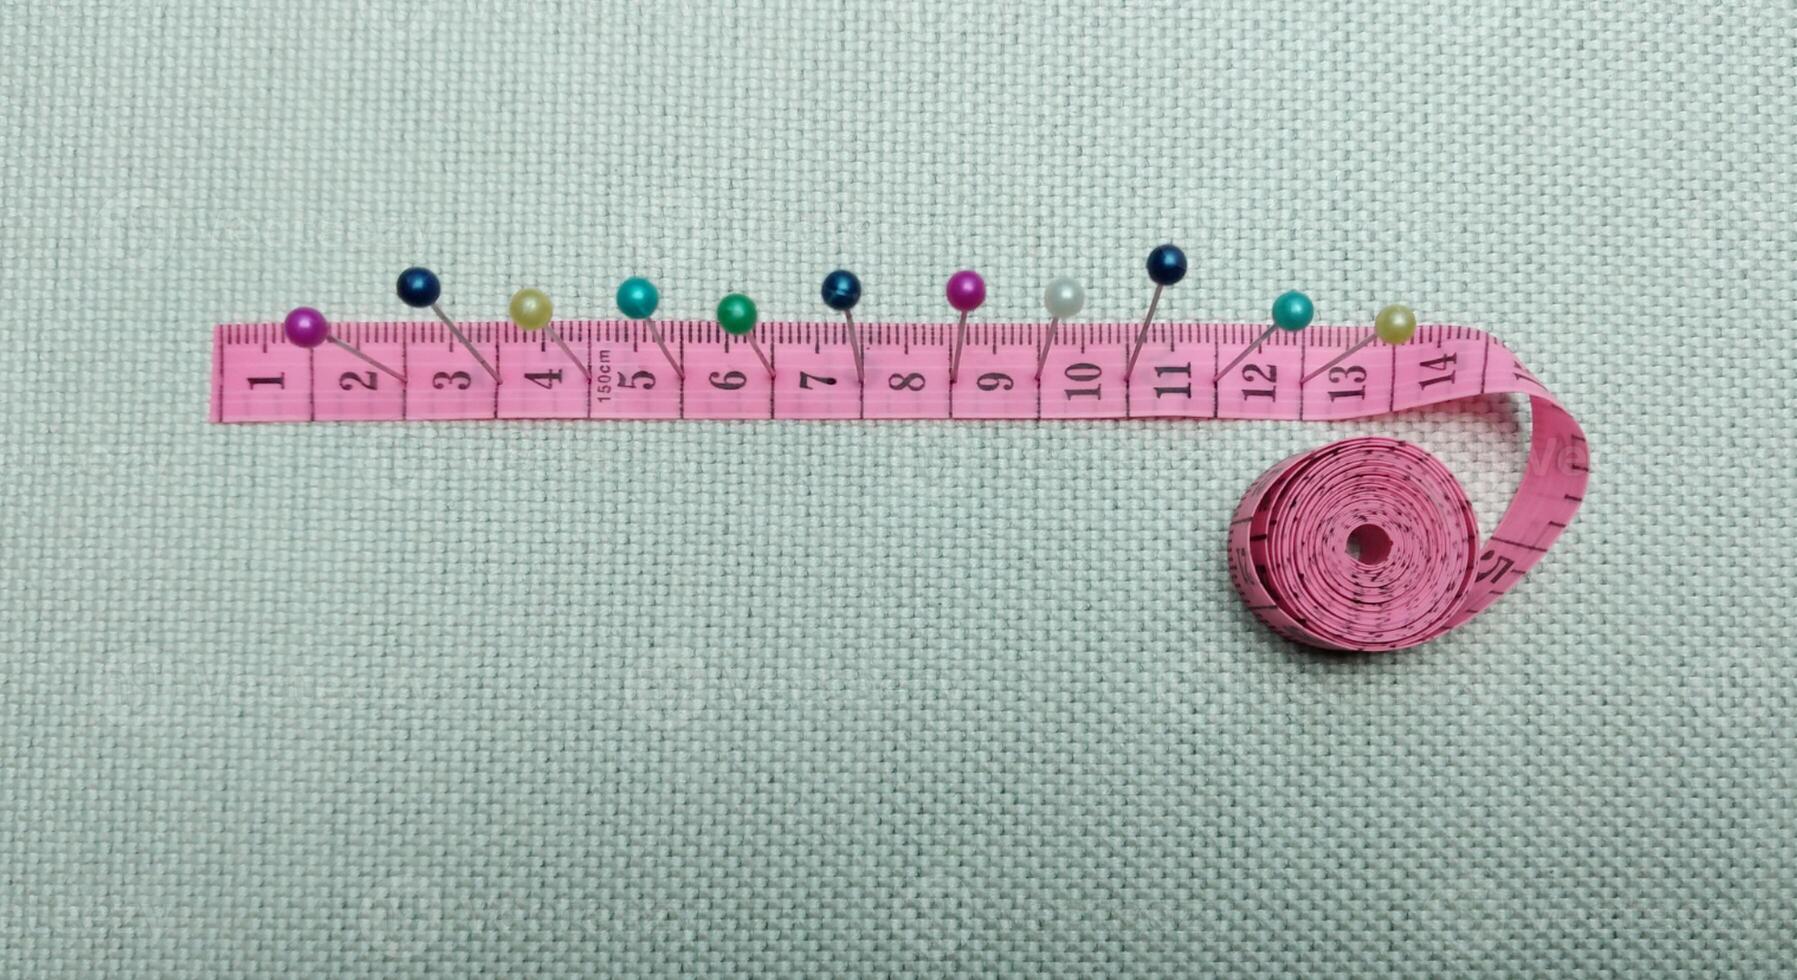 sewing needles and pins of different colors, ruler on white cloth background photo